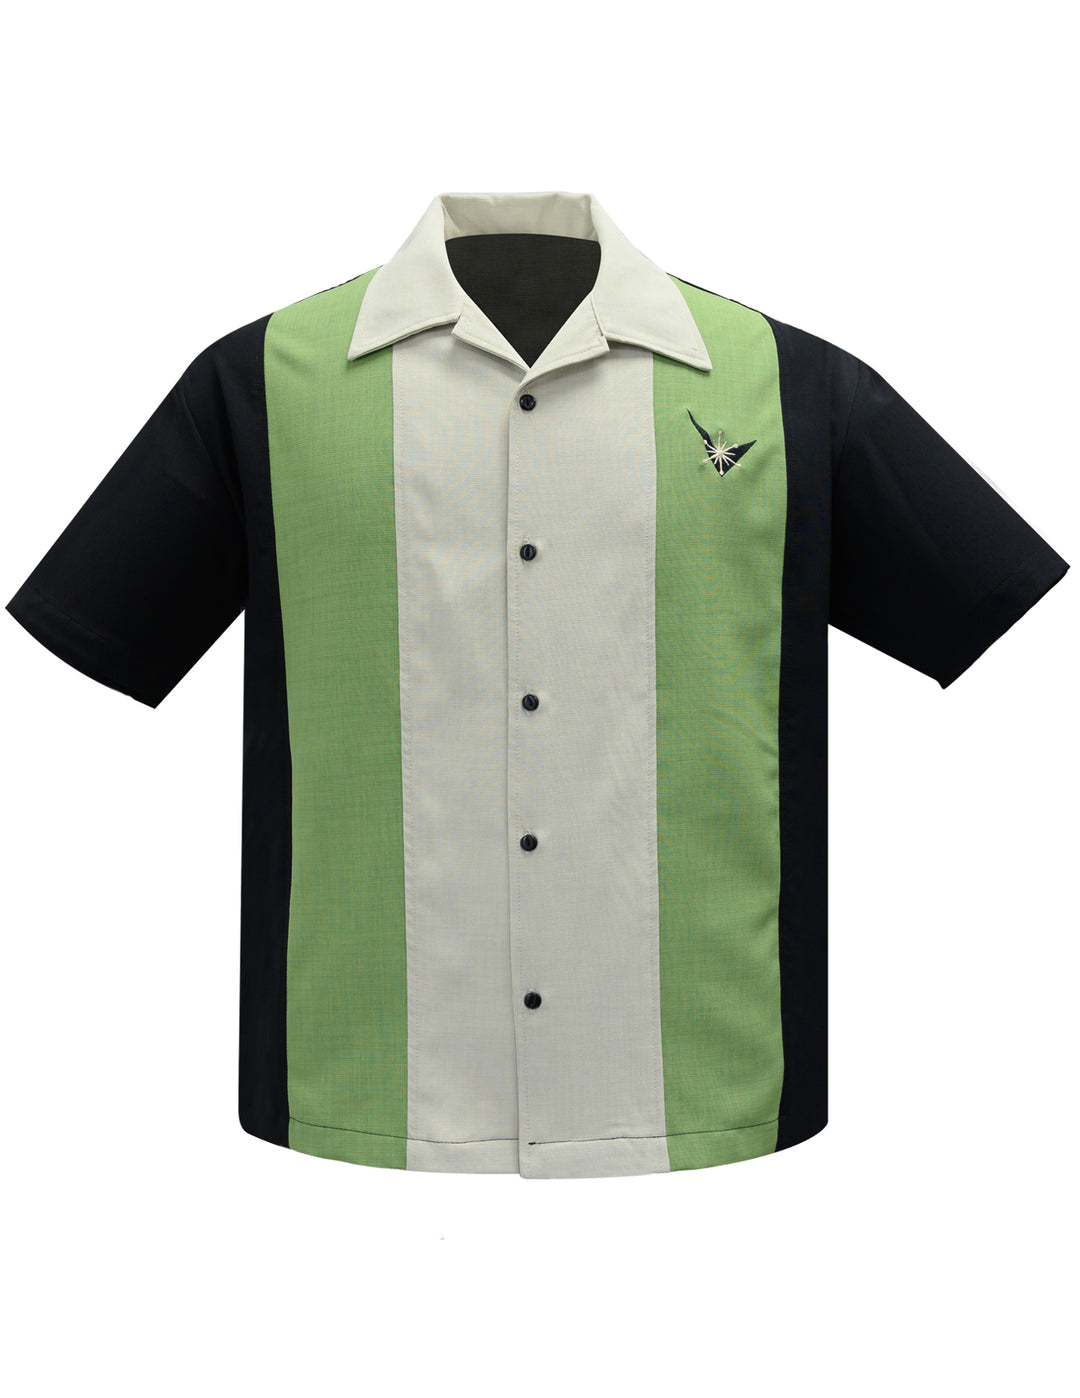 Atomic Mad Men Bowling Shirt in Black/Apple/Stone by Steady Clothing